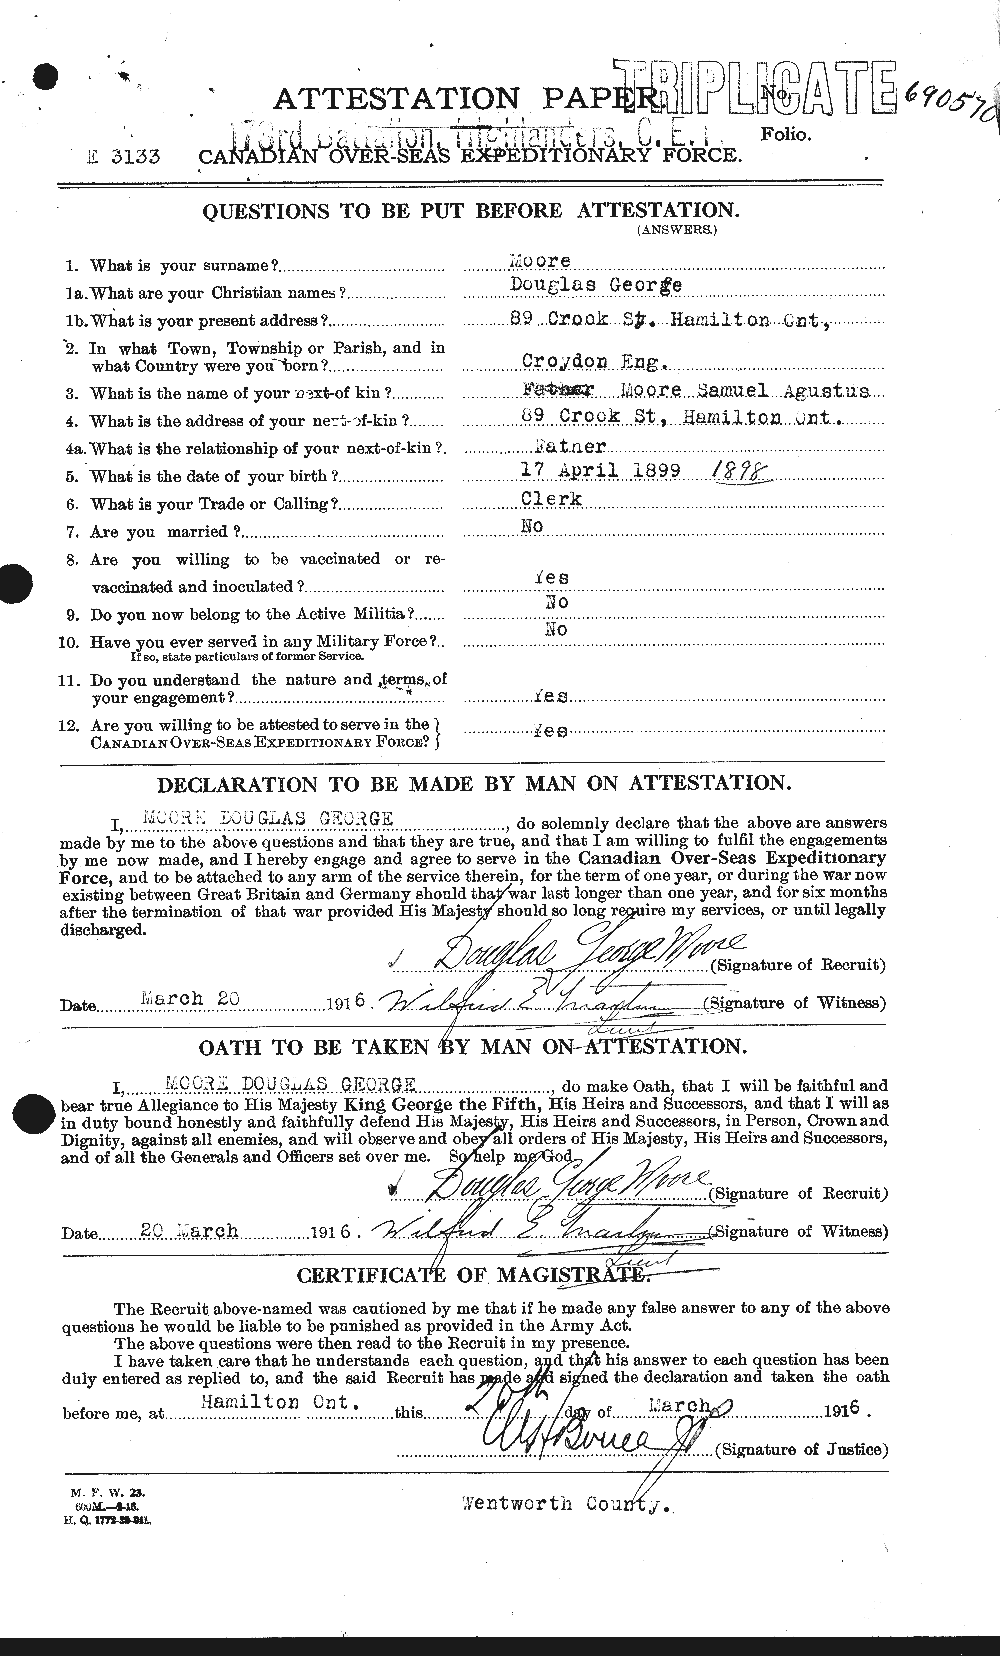 Personnel Records of the First World War - CEF 506589a